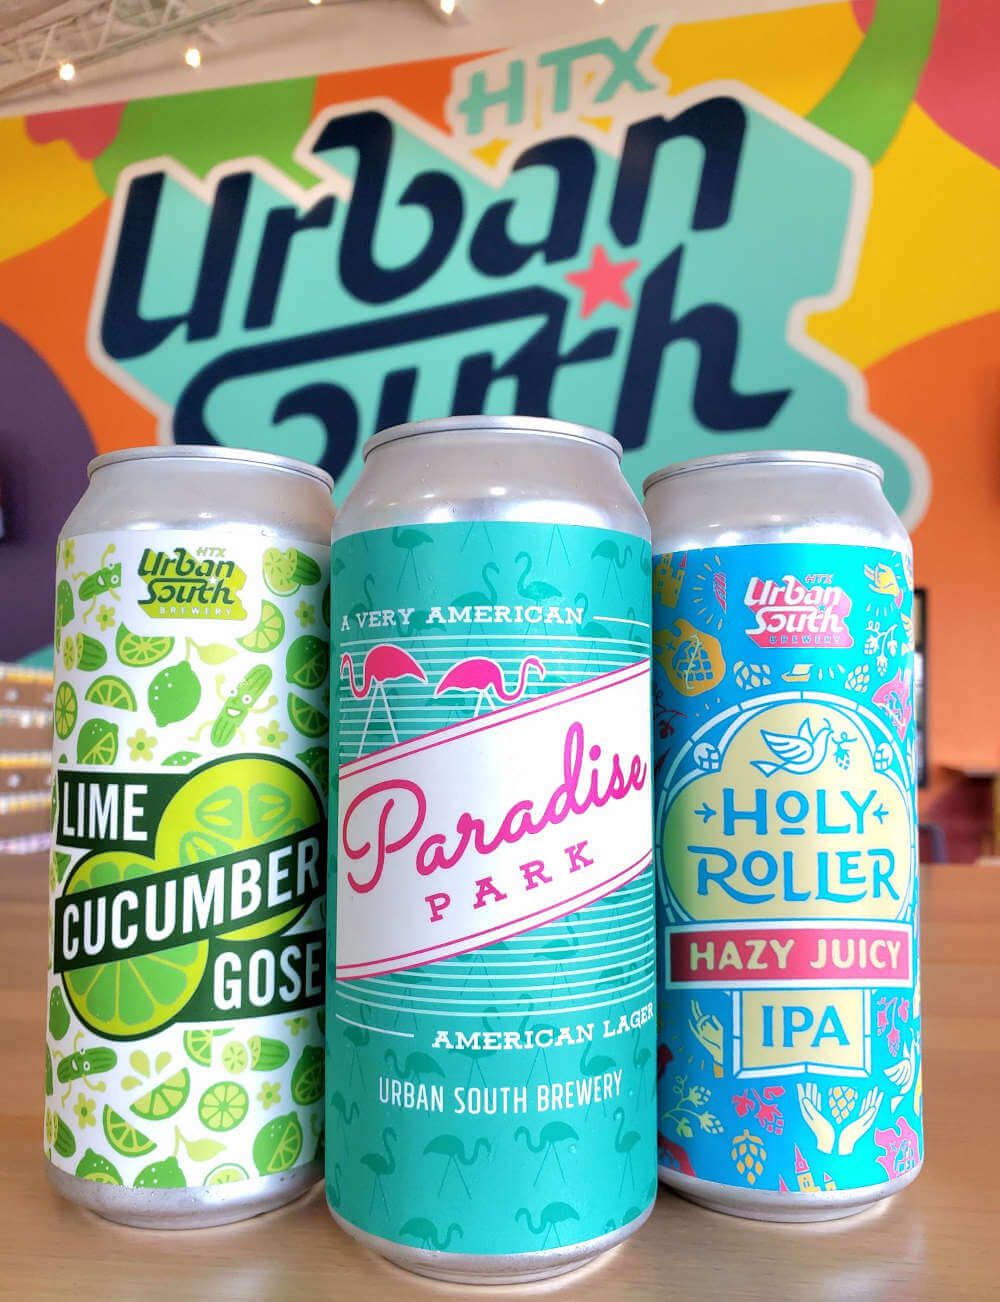 Urban South Brewery brings New Orleans beers to Houston market